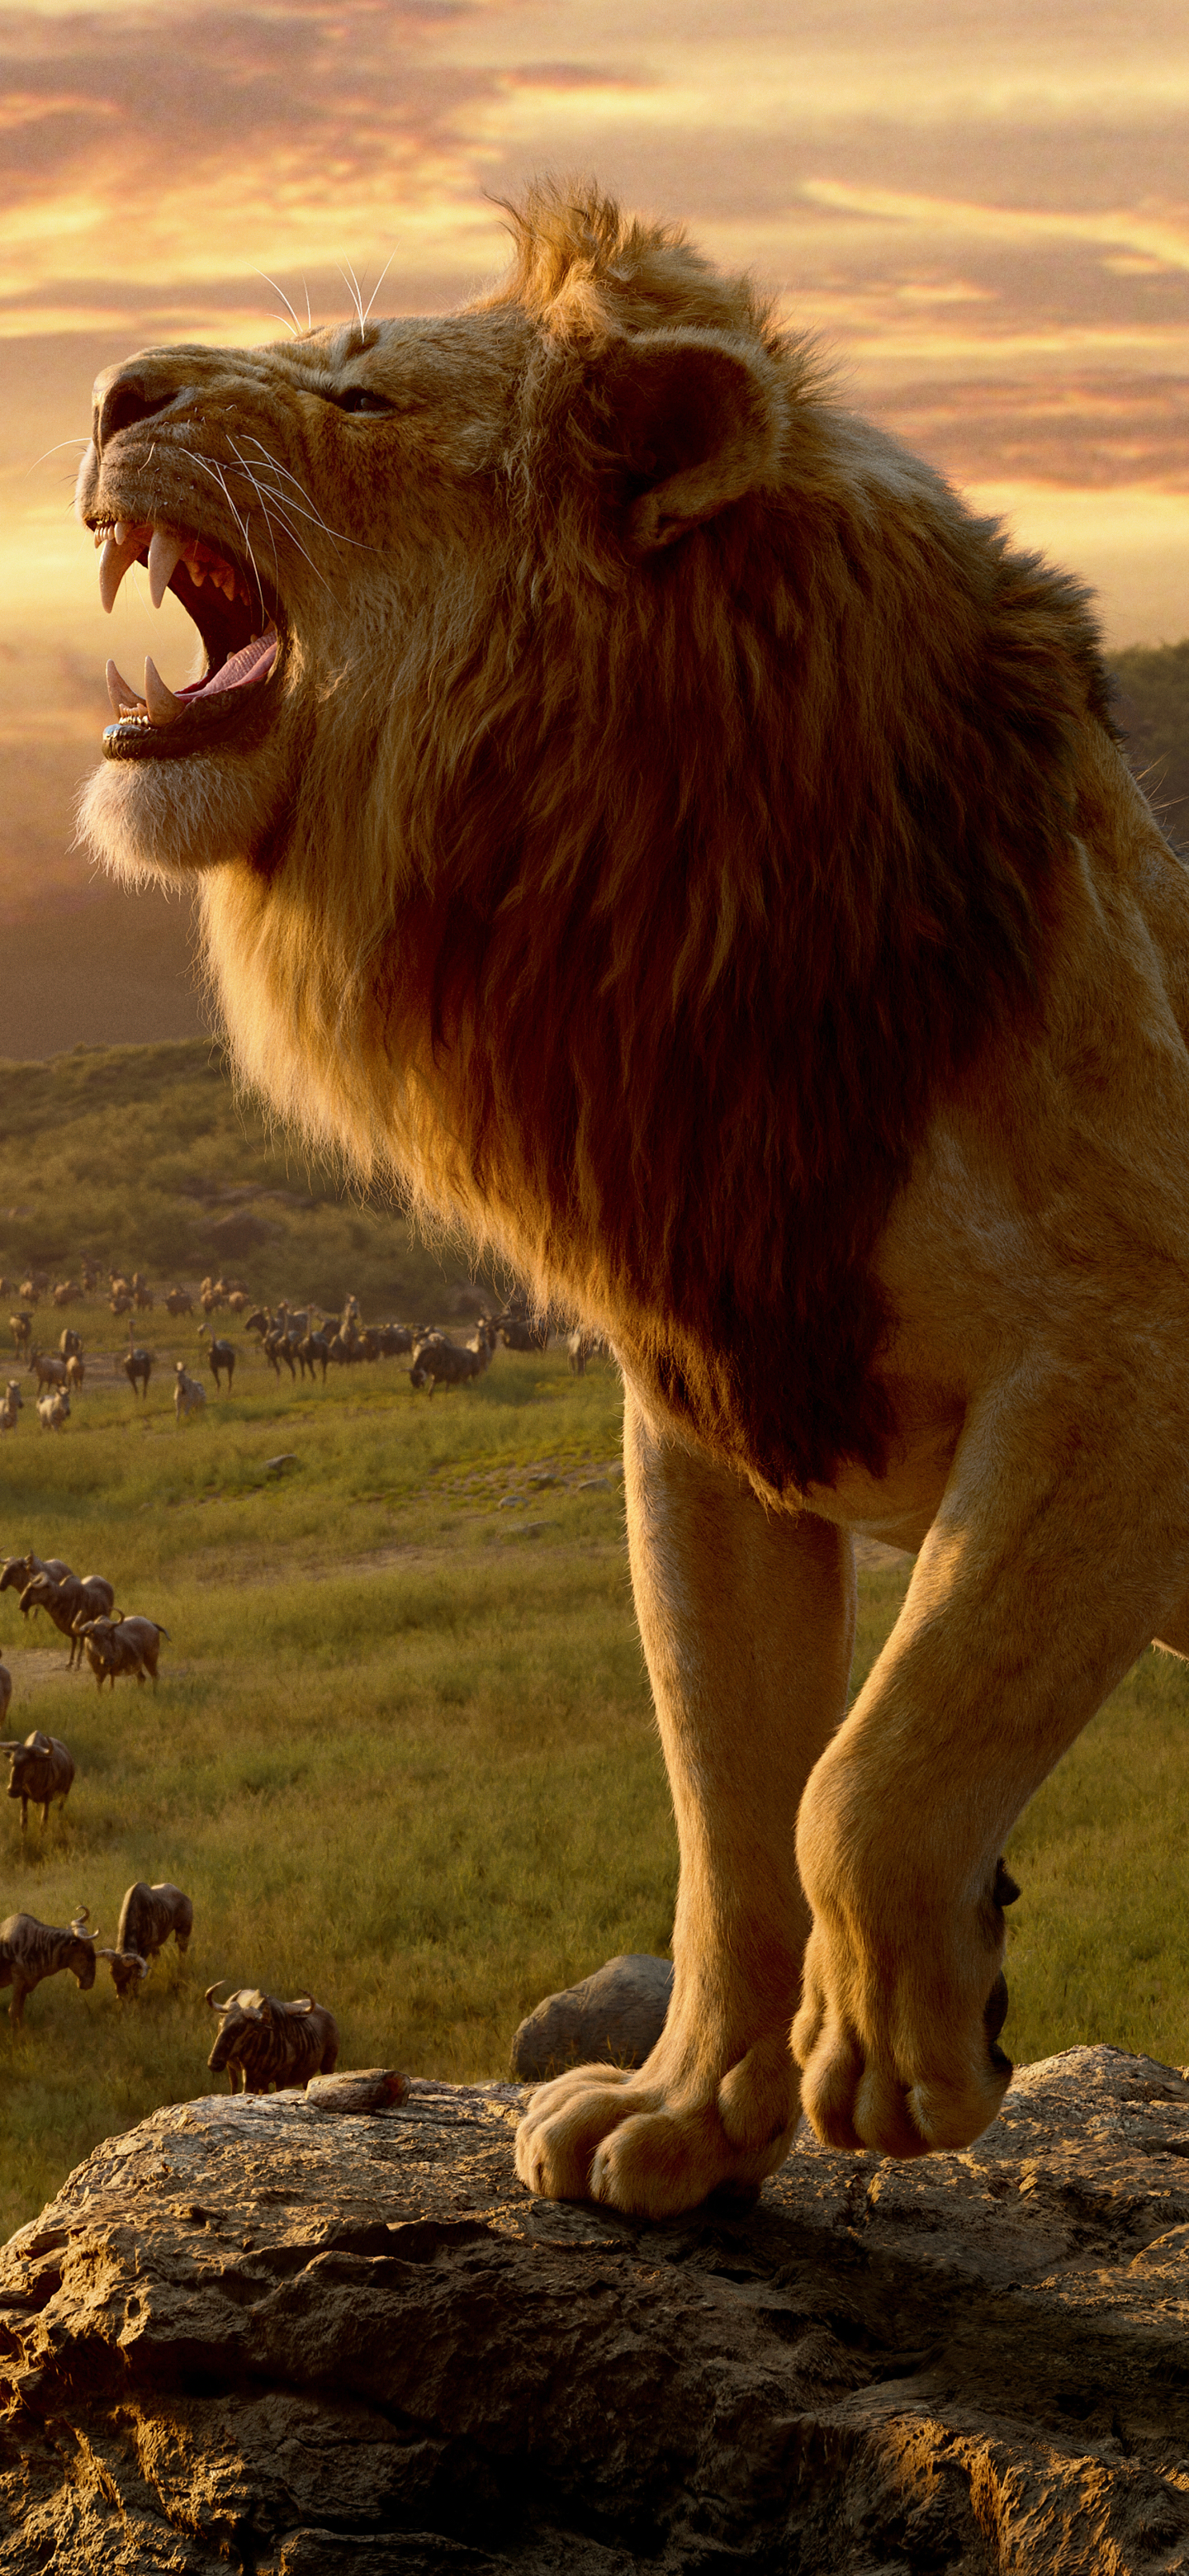 Free HD lion, the lion king (2019), movie, mufasa (the lion king)